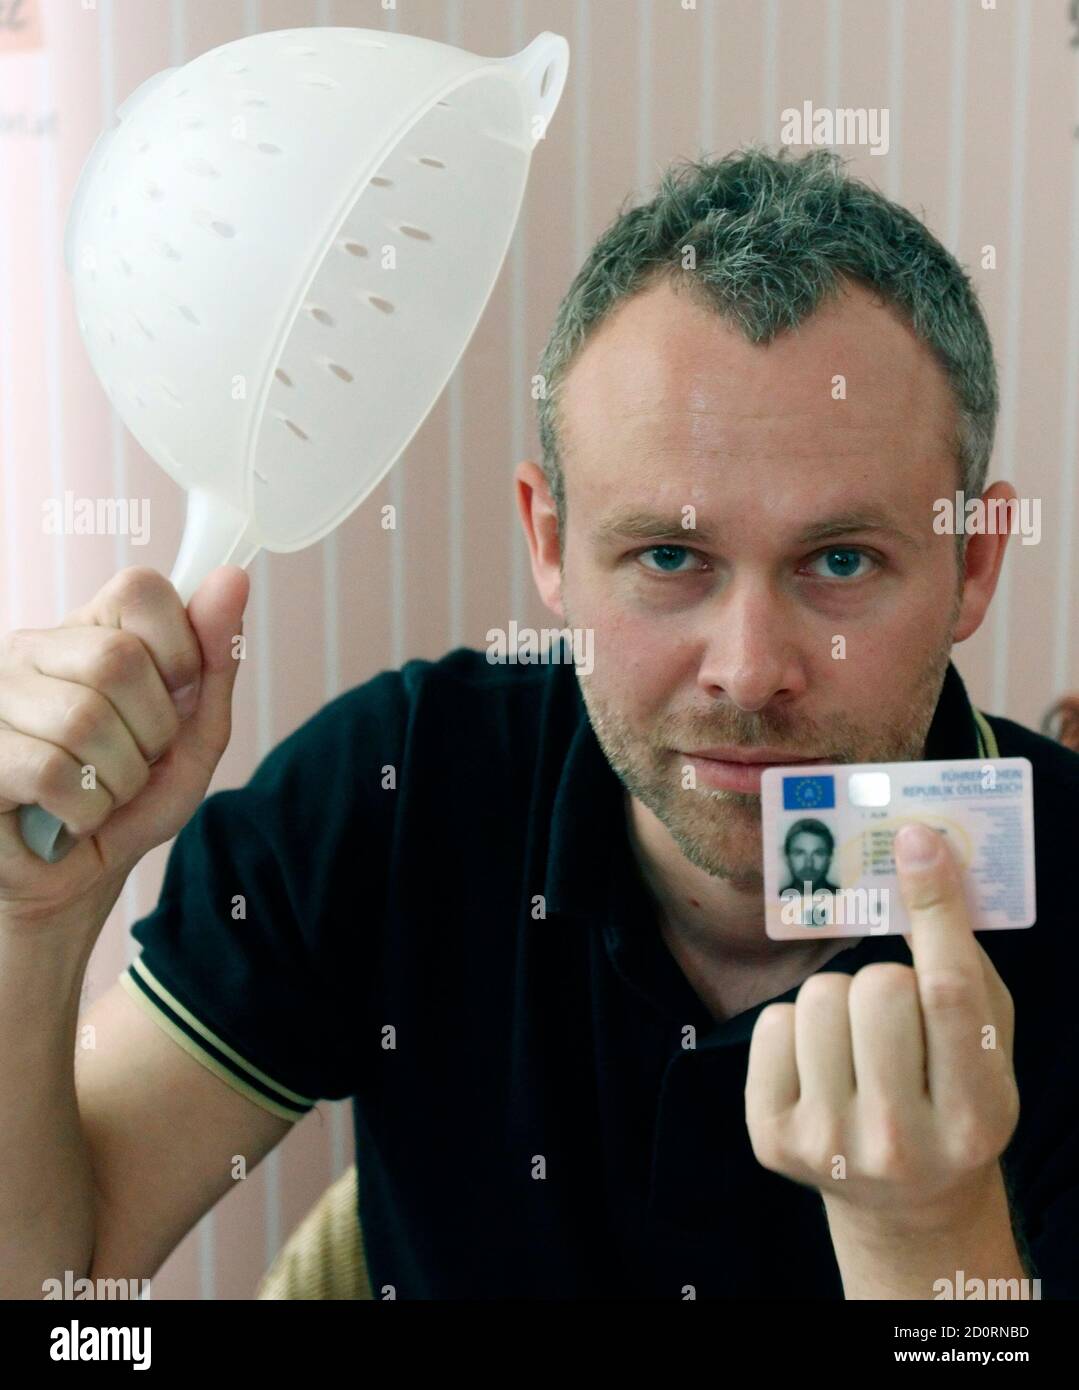 Austrian businessman Niko Alm poses with his Austrian driver's licence,  depicting him wearing a pasta strainer, during a news conference in Vienna,  July 14, 2011. Alm is promoting the Church of the